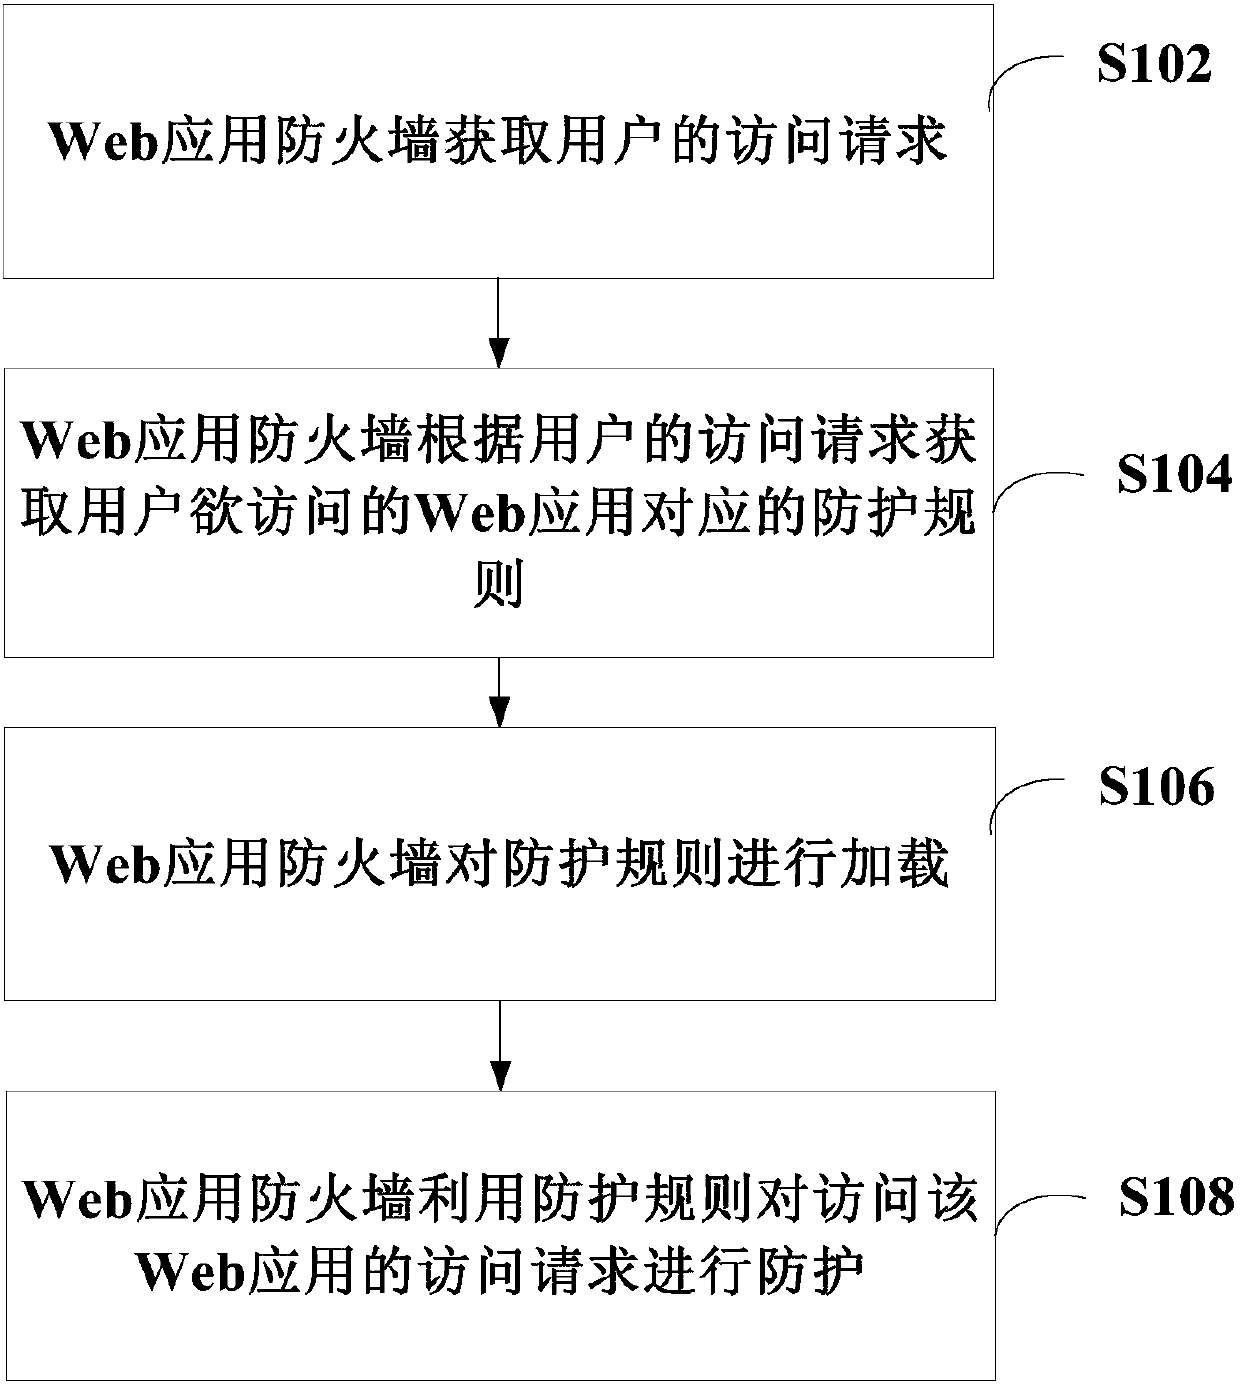 Web application protection method and system, and Web application firewall